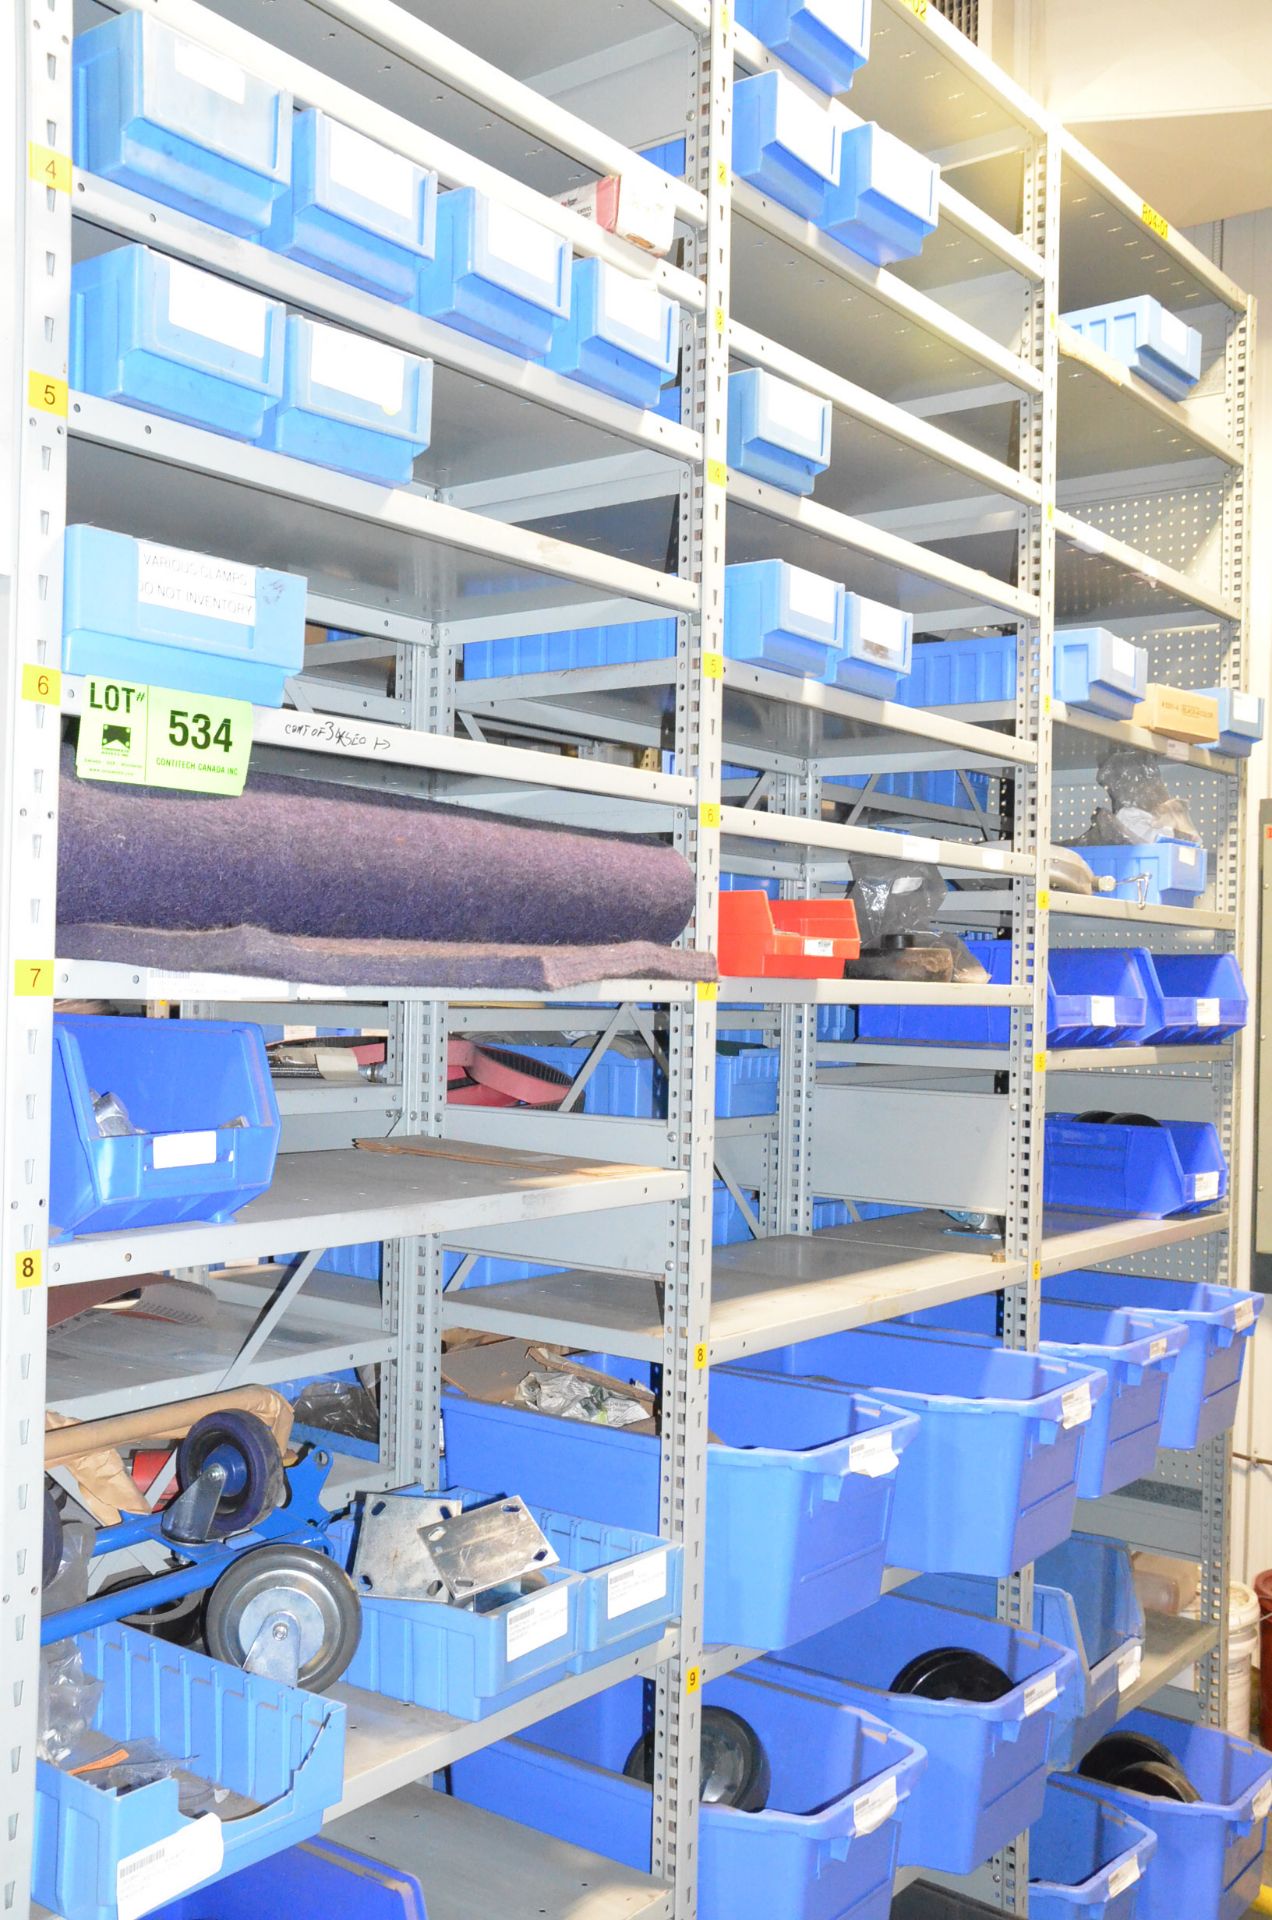 LOT/ CONTENTS OF (3) SECTIONS OF SHELVING CONSISTING OF CASTERS [RIGGING FEE FOR LOT #534 - $tbd USD